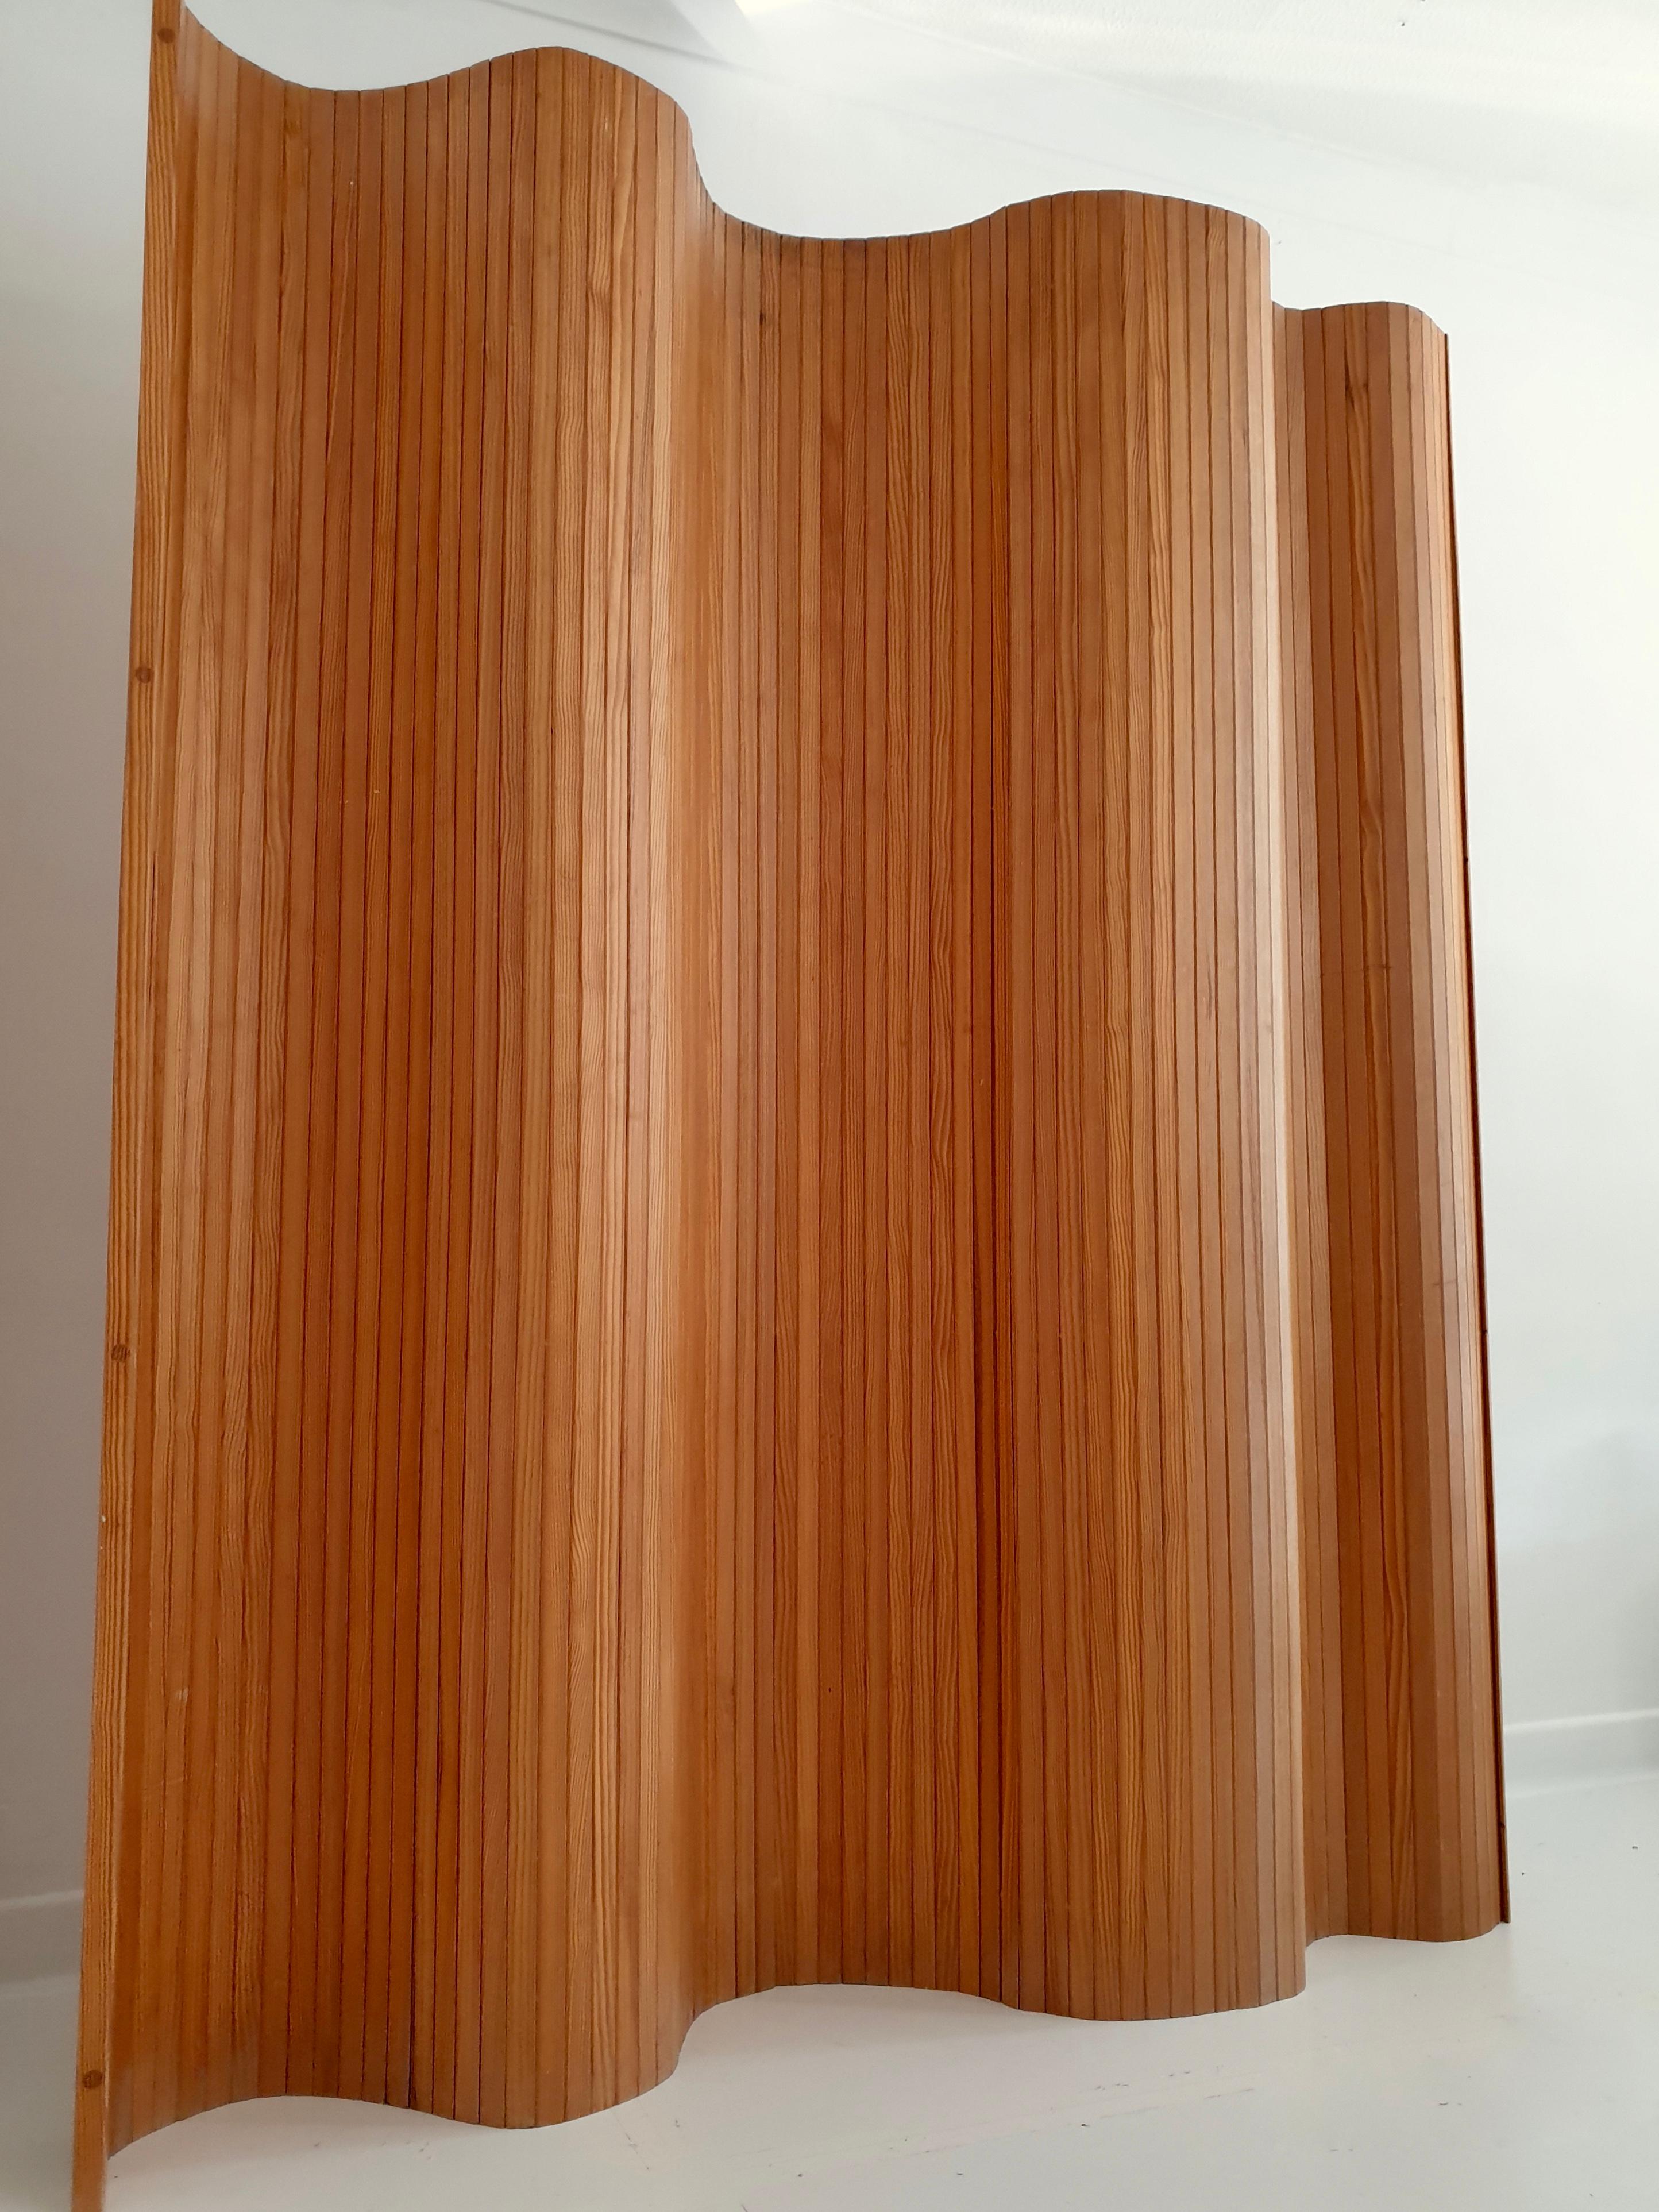 Pine Tambour Room Divider / Screen in the Manner of Aalto by Habitat, circa 1980 3